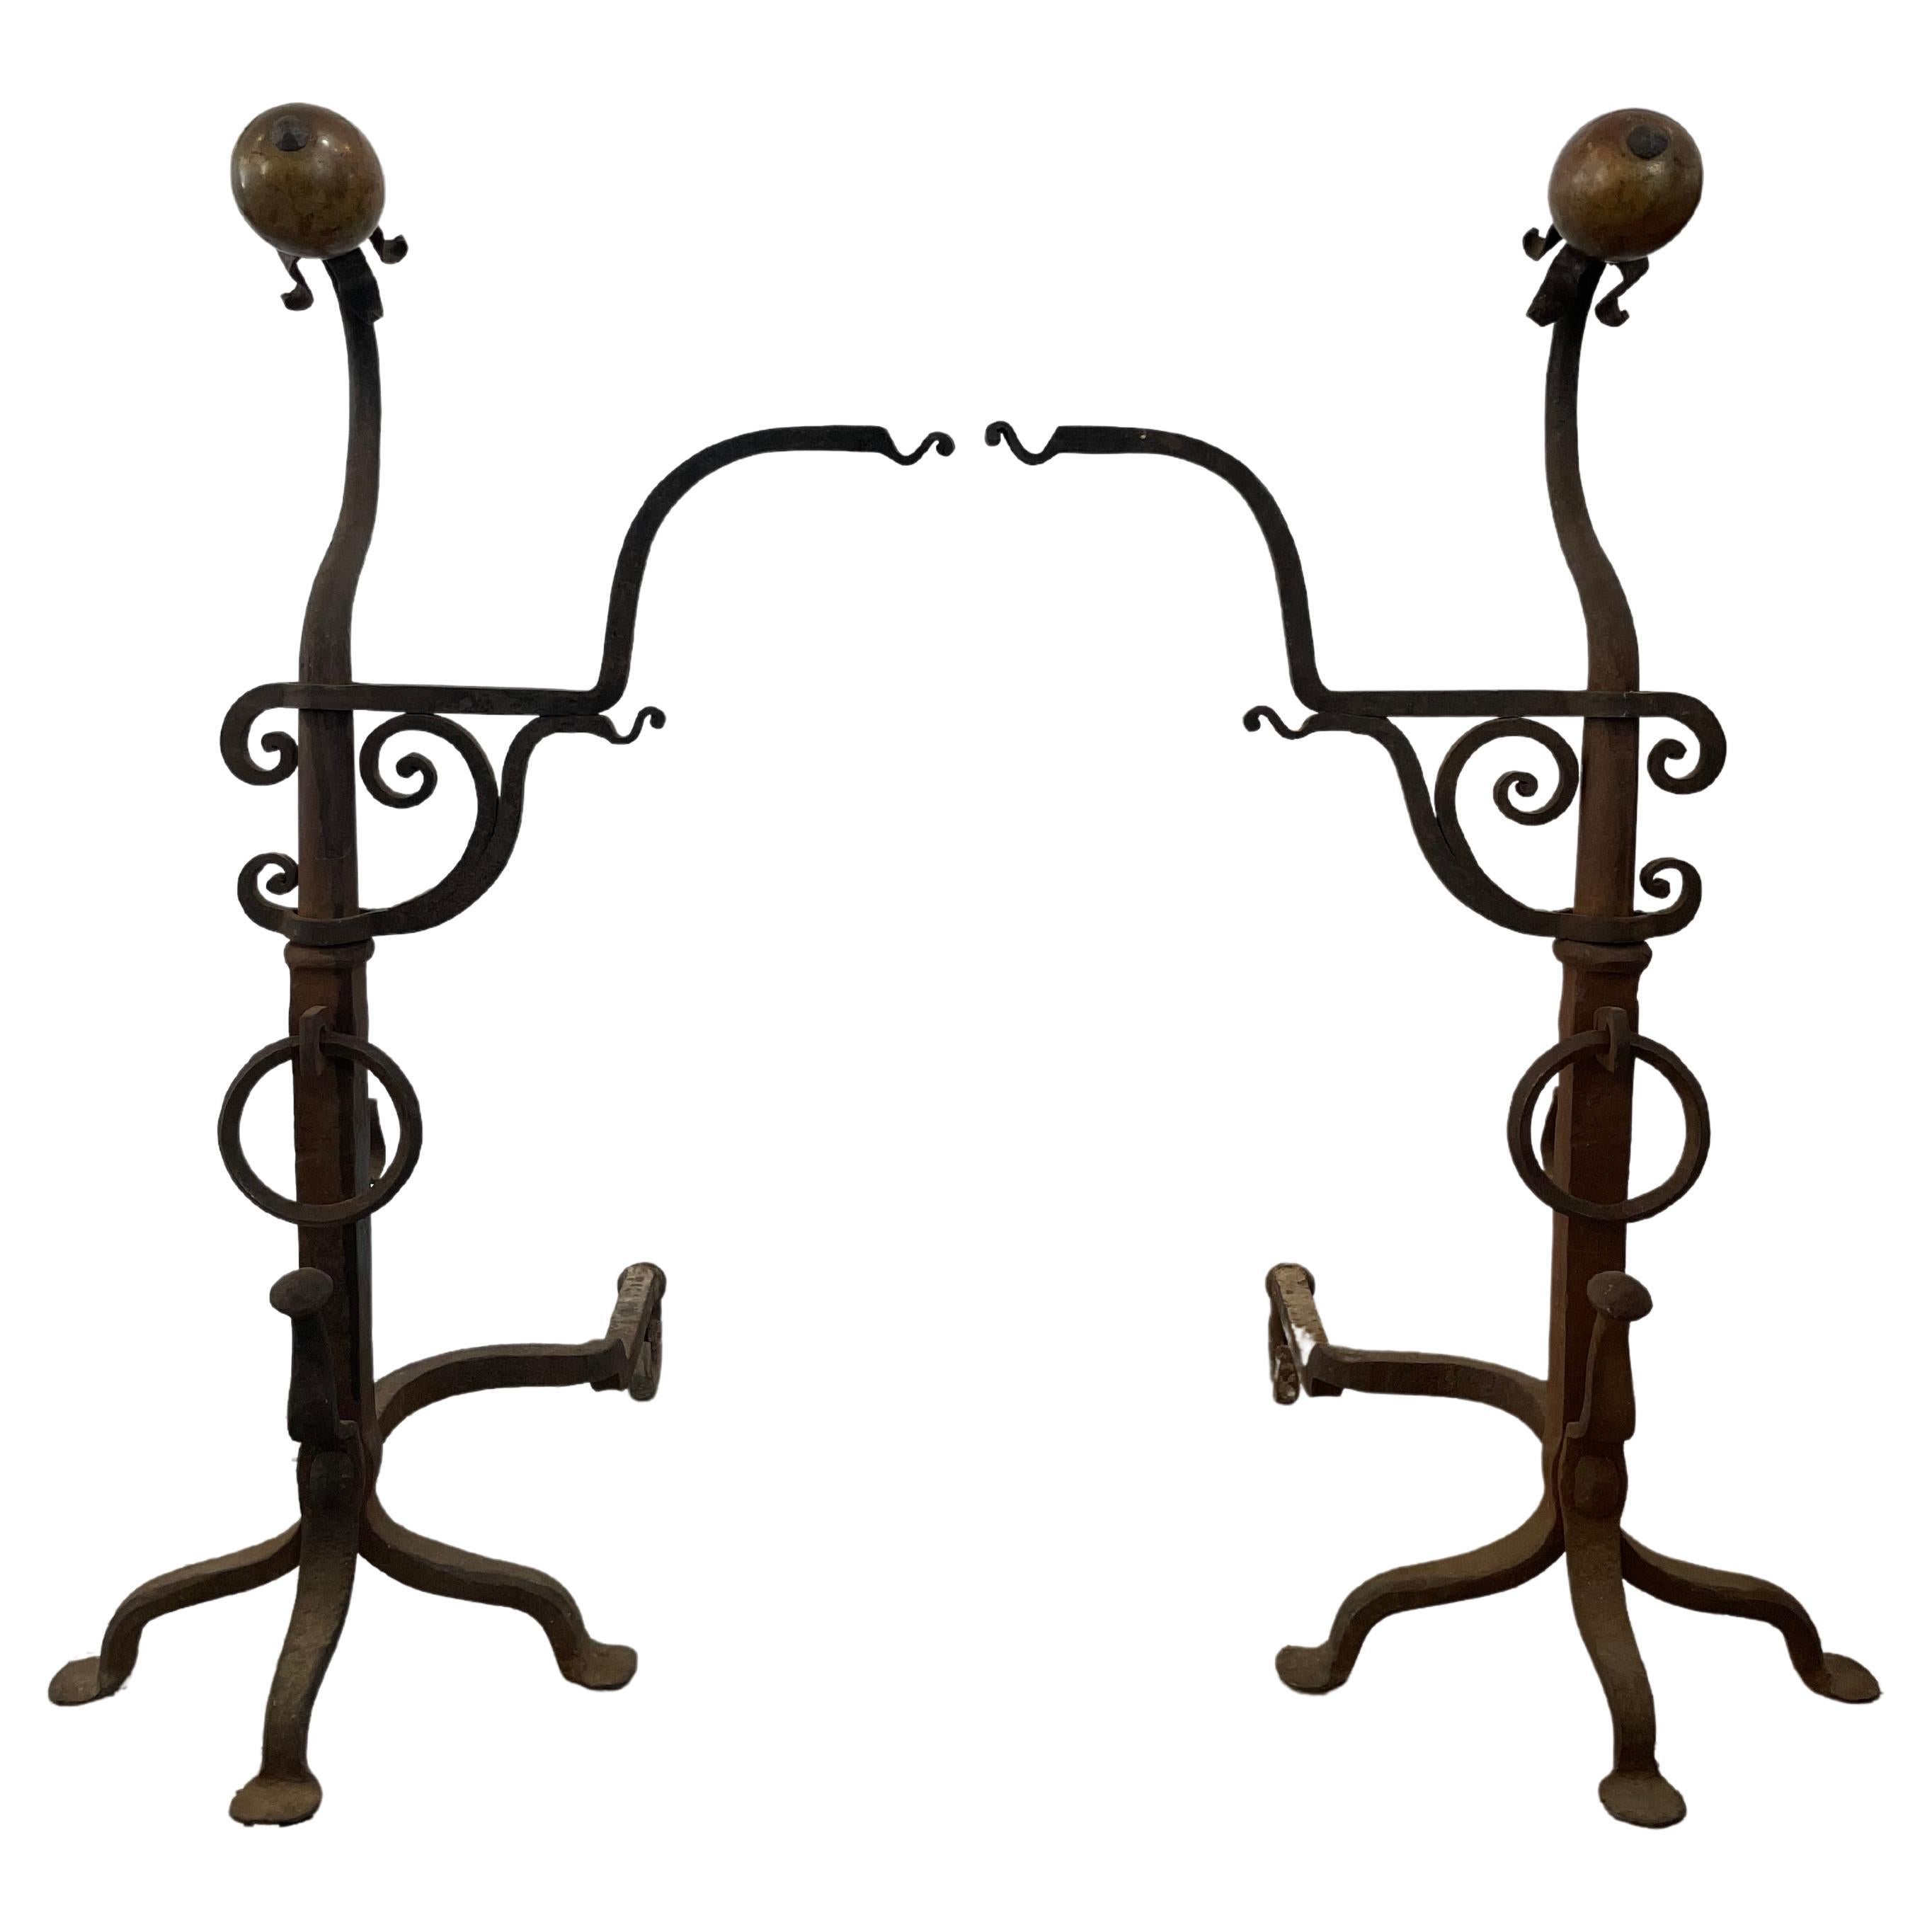 Addison Mizner Spanish Colonial Style Andirons For Sale